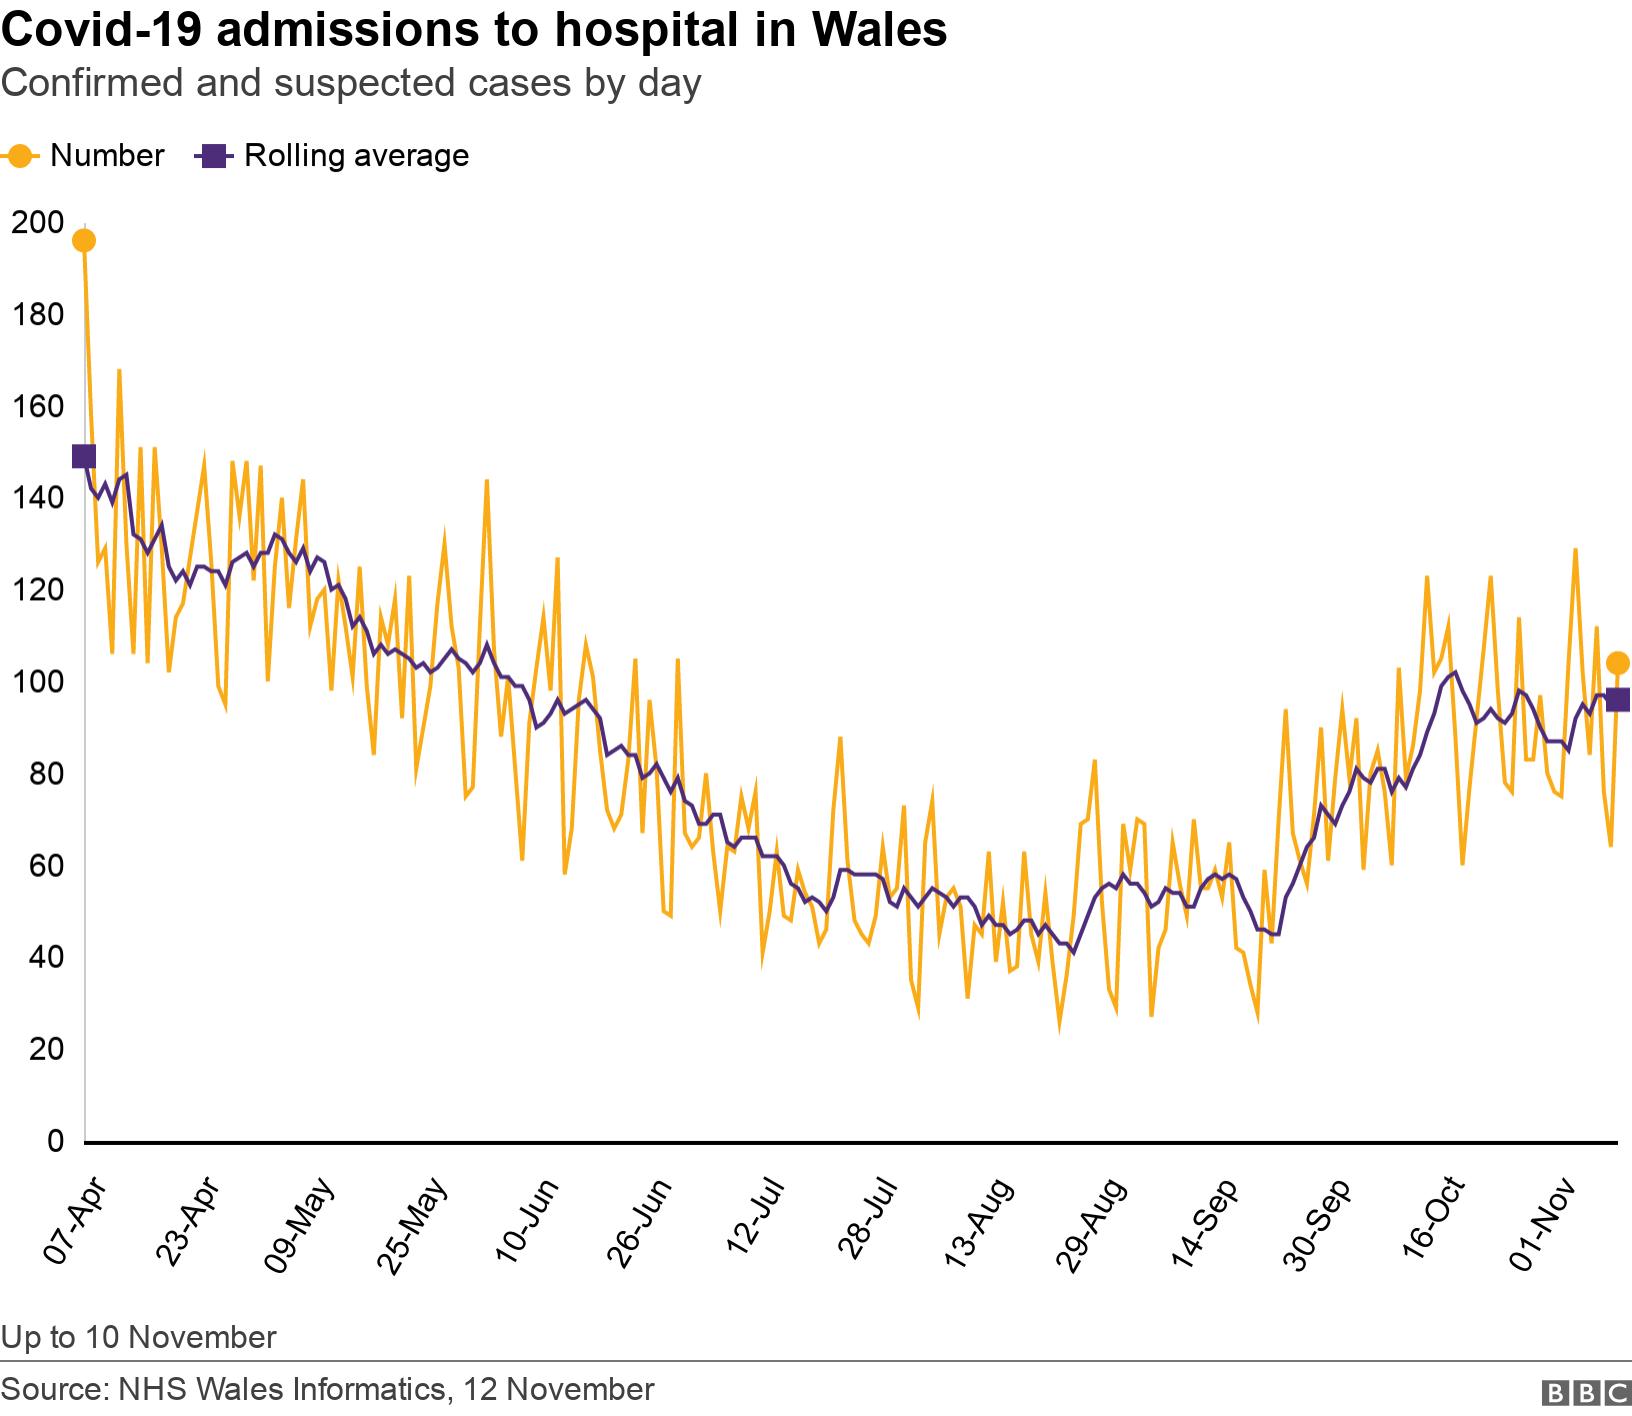 Covid-19 admissions to hospital in Wales. Confirmed and suspected cases by day. Up to 10 November.